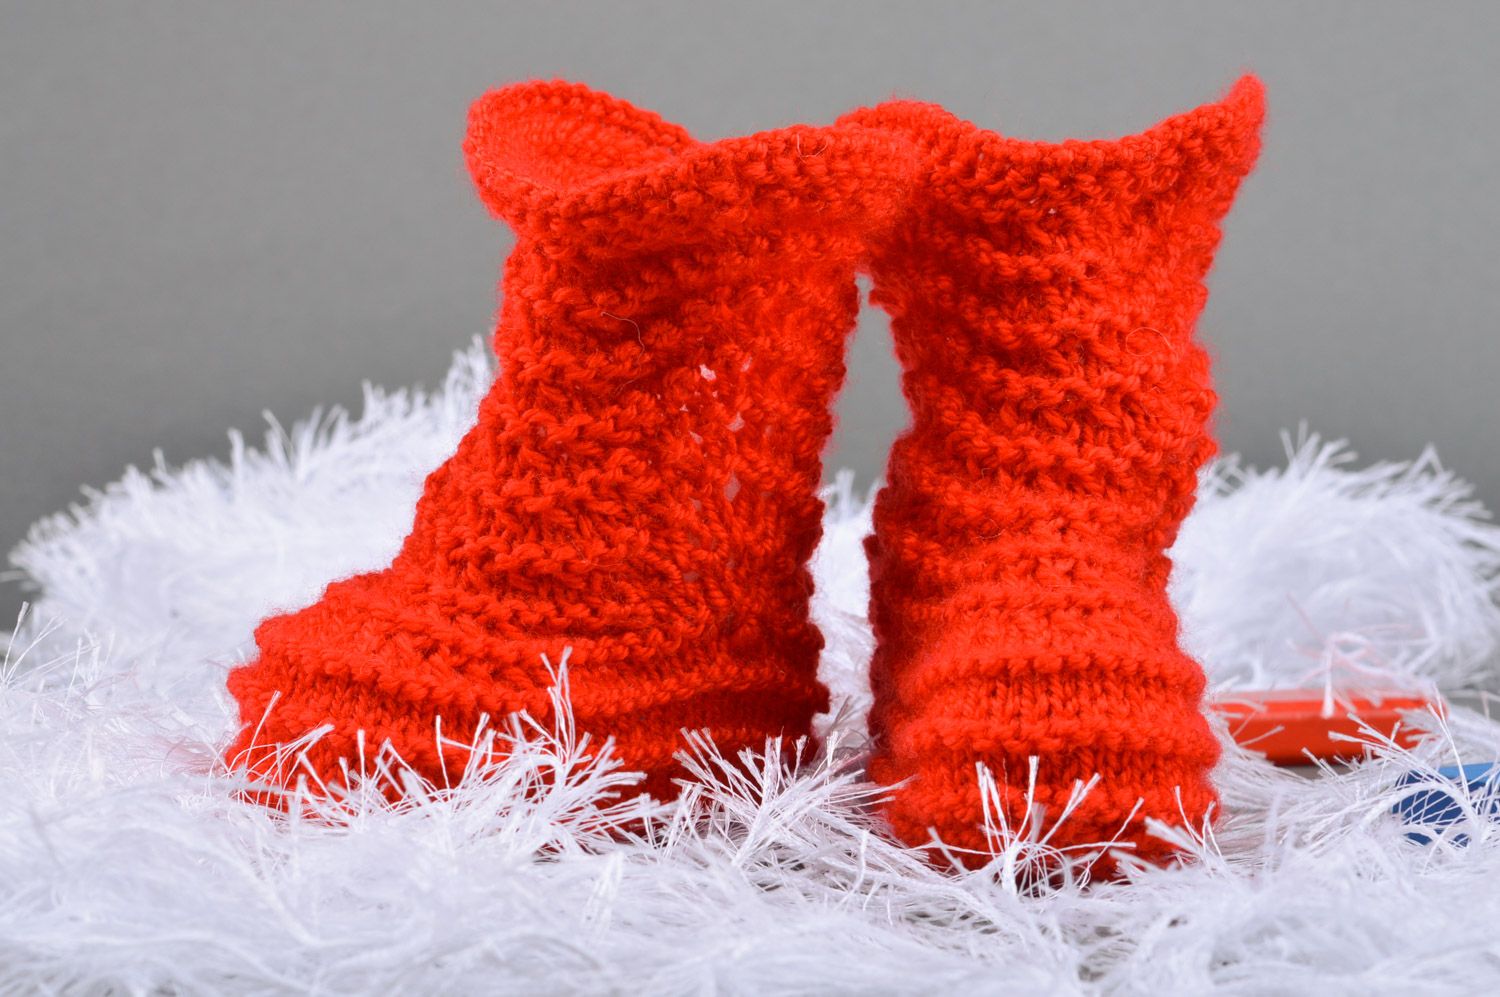 Handmade red lace high baby booties knitted of semi-woolen threads photo 5